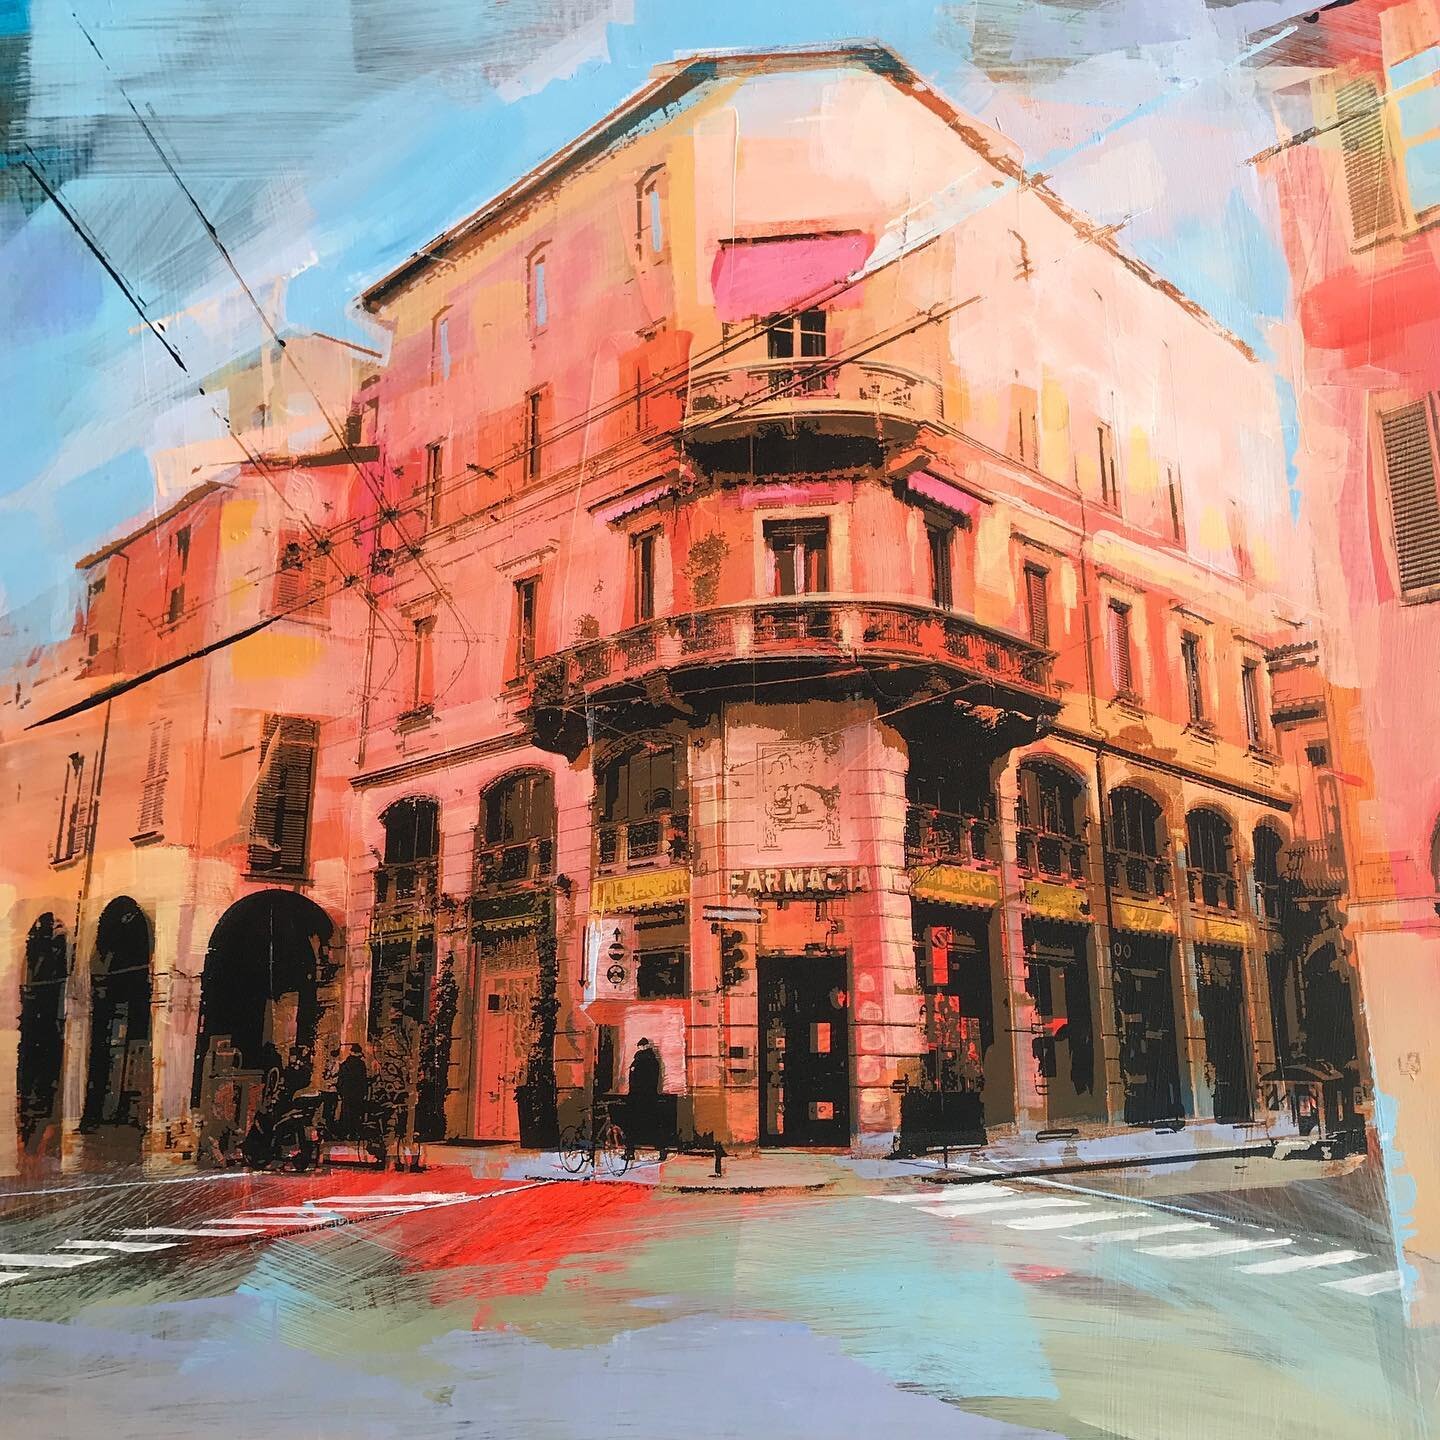 Beautiful buildings of Bologna, haven&rsquo;t posted for quite a while but a quick trip to Italy at half term has helped with some new inspiration!
#italy #painting #printing #illustration #cityscape #bologna #colour